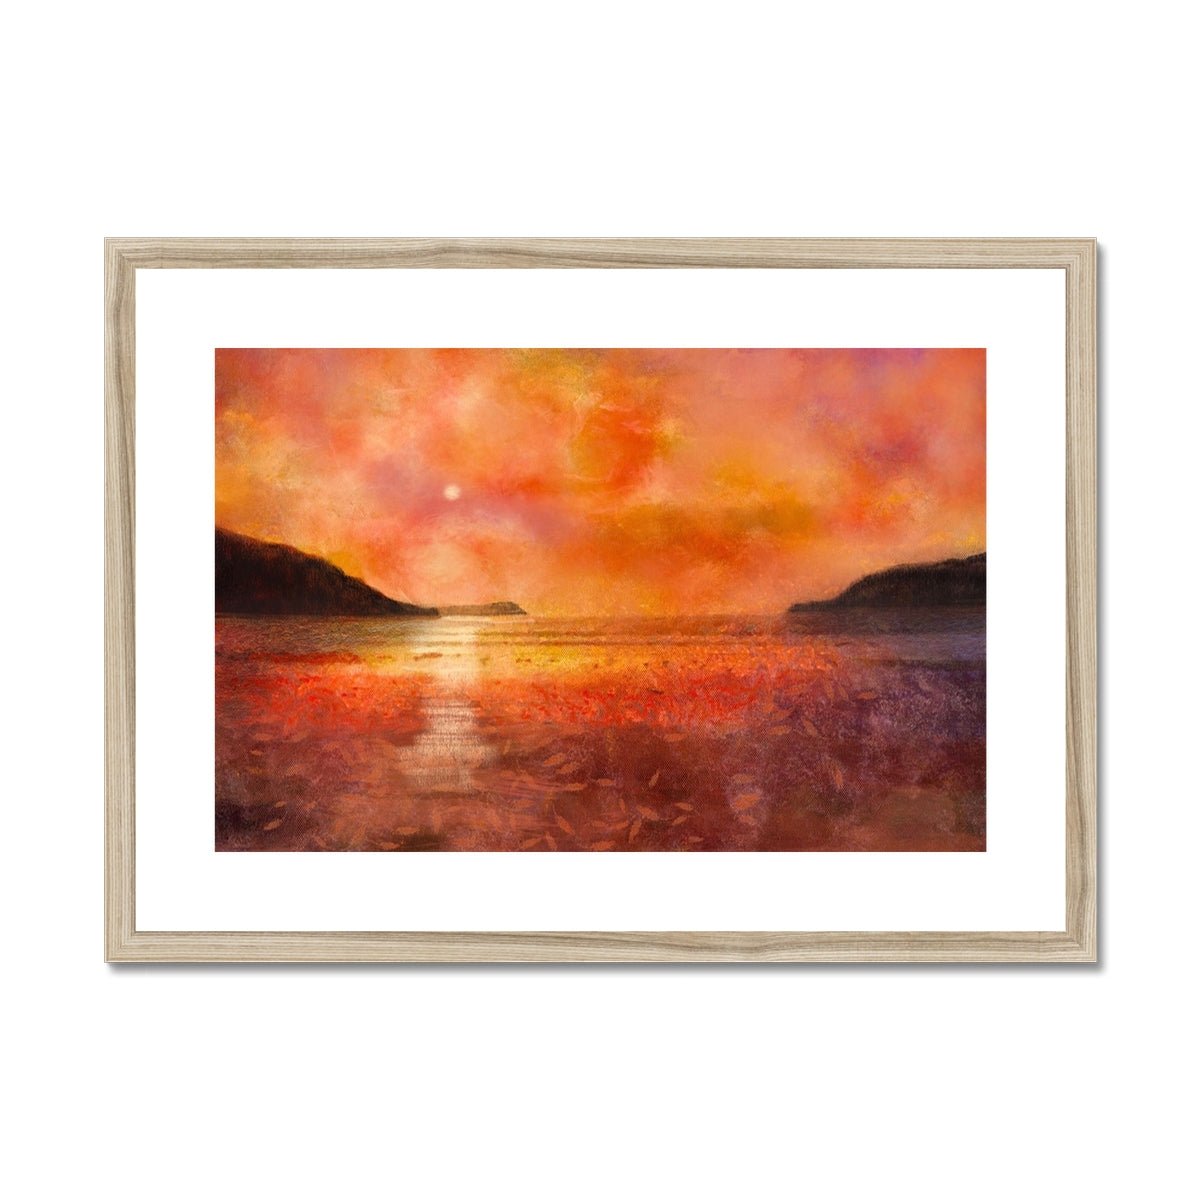 Calgary Beach Sunset Mull Painting | Framed & Mounted Prints From Scotland-Framed & Mounted Prints-Hebridean Islands Art Gallery-A2 Landscape-Natural Frame-Paintings, Prints, Homeware, Art Gifts From Scotland By Scottish Artist Kevin Hunter